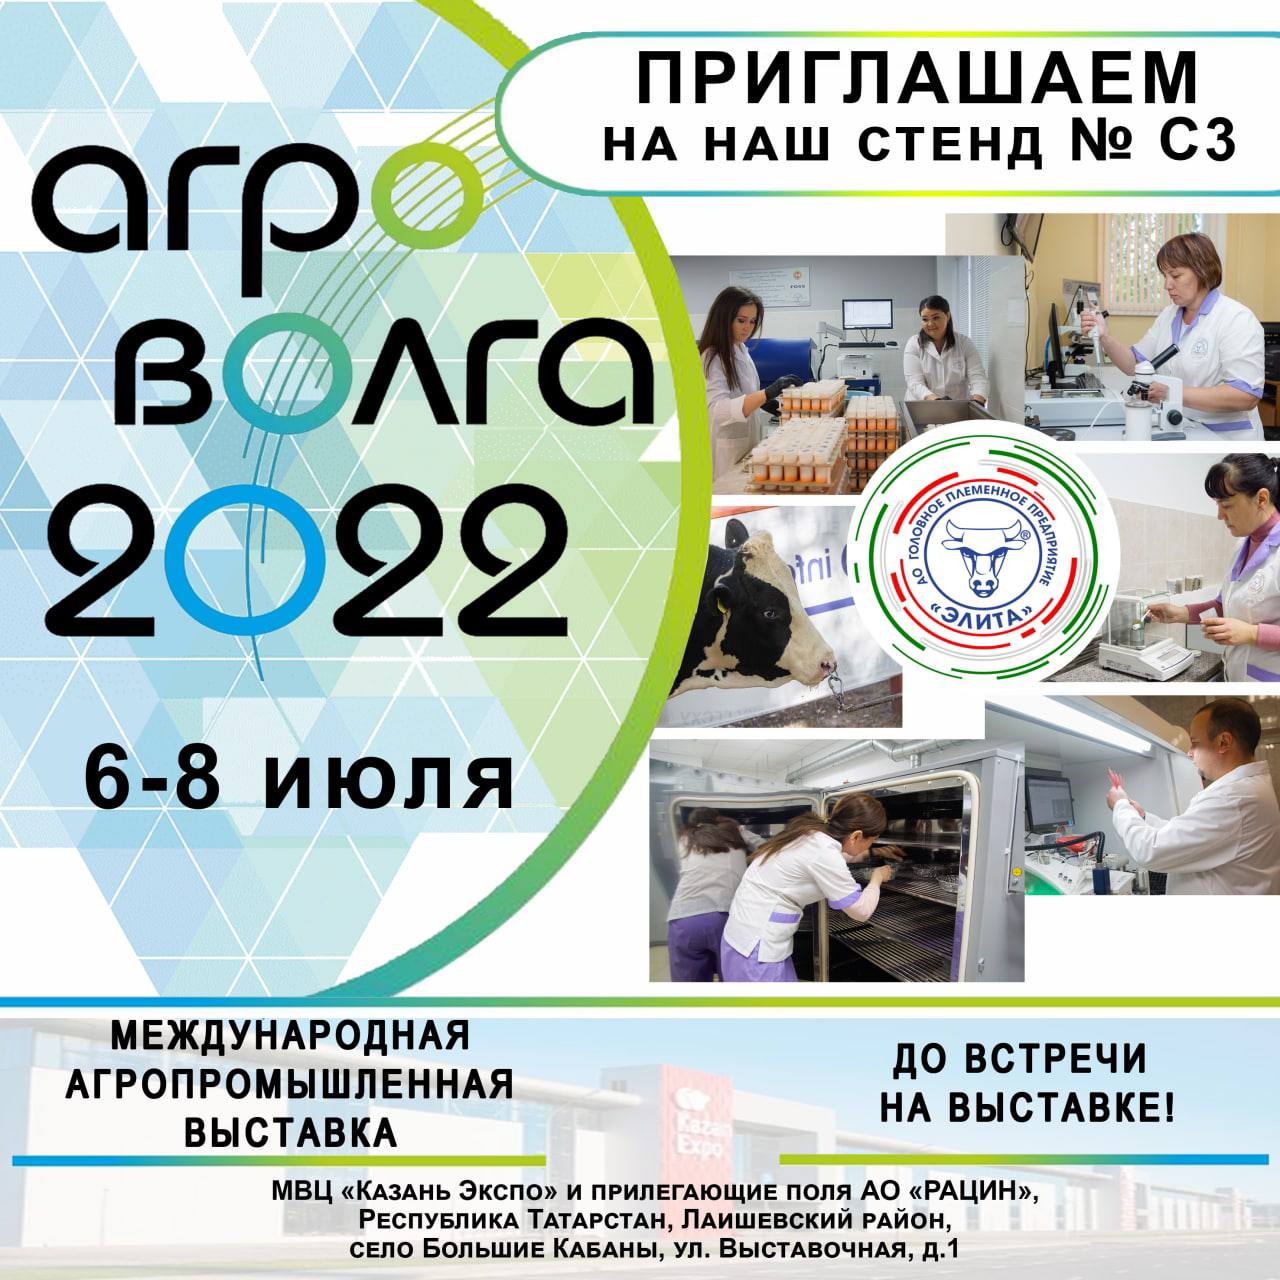 We invite you to the International Agro-industrial exhibition "AGROVOLGA 2022"